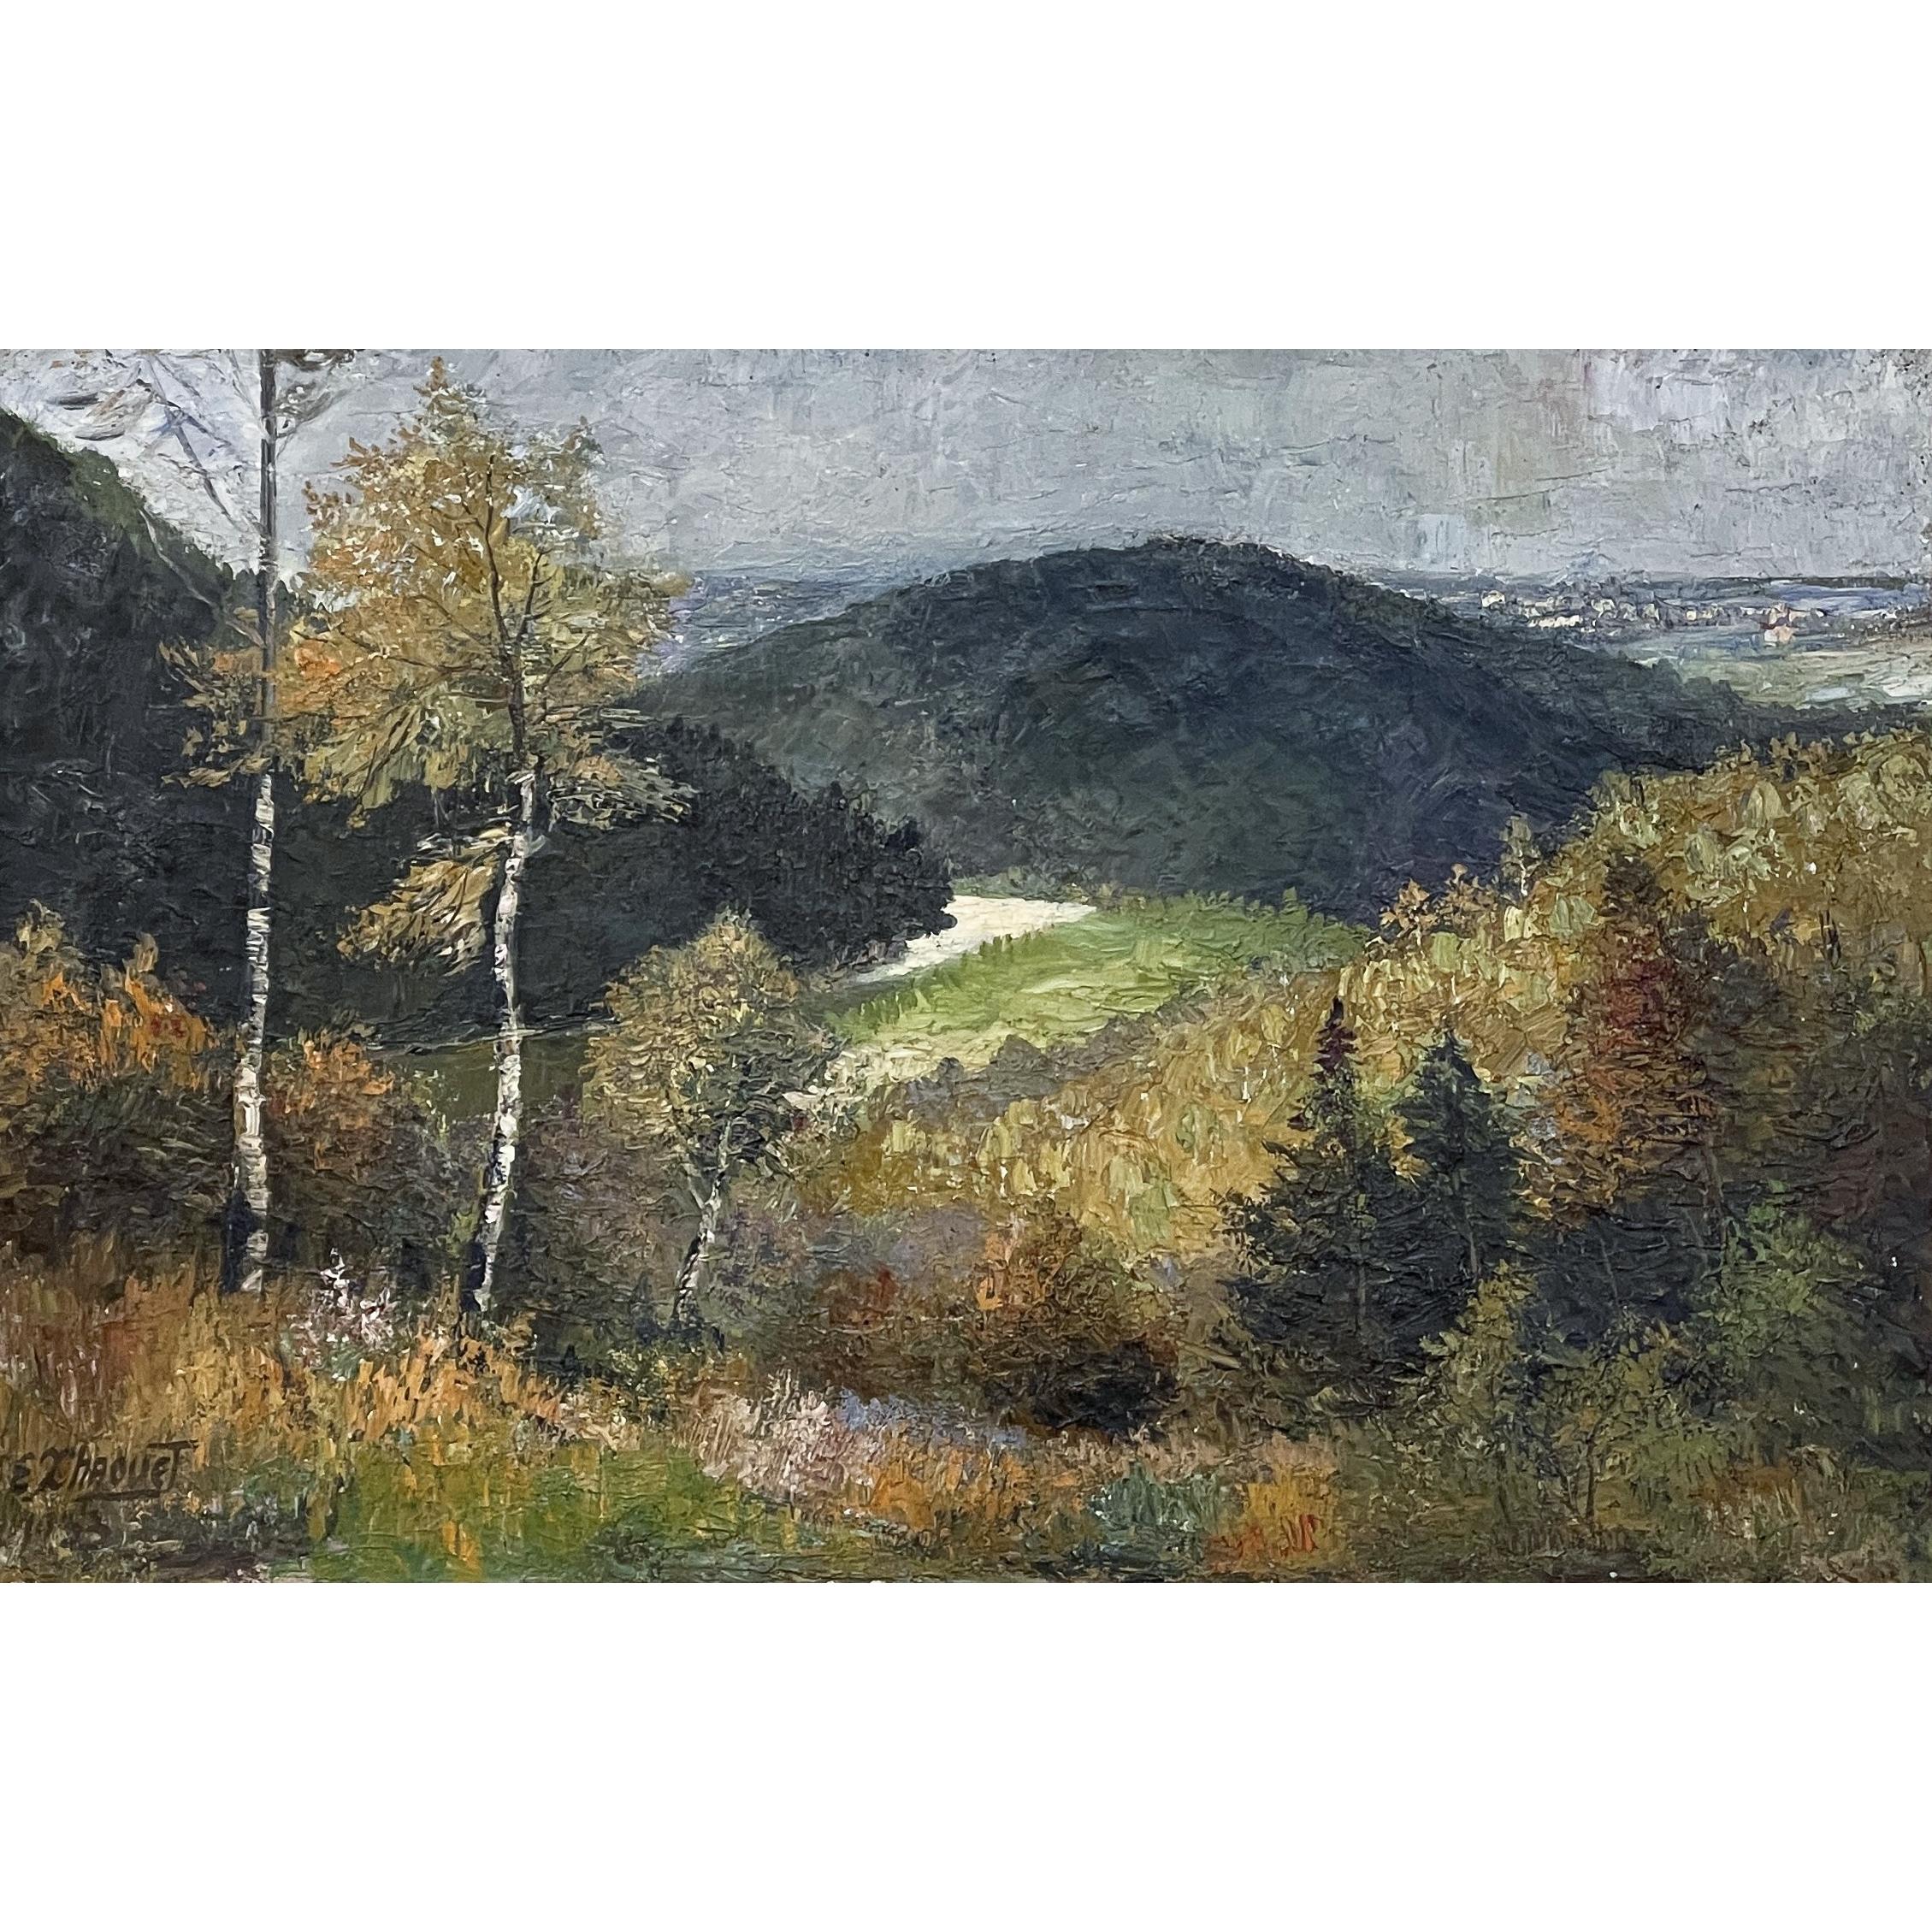 Antique framed oil painting on canvas signed E.X. Chaouet is a captivating pastoral inspired by the rolling hills around the northern French plains. Here we see depicted an early Fall period, with colors just starting to change. From the artist's